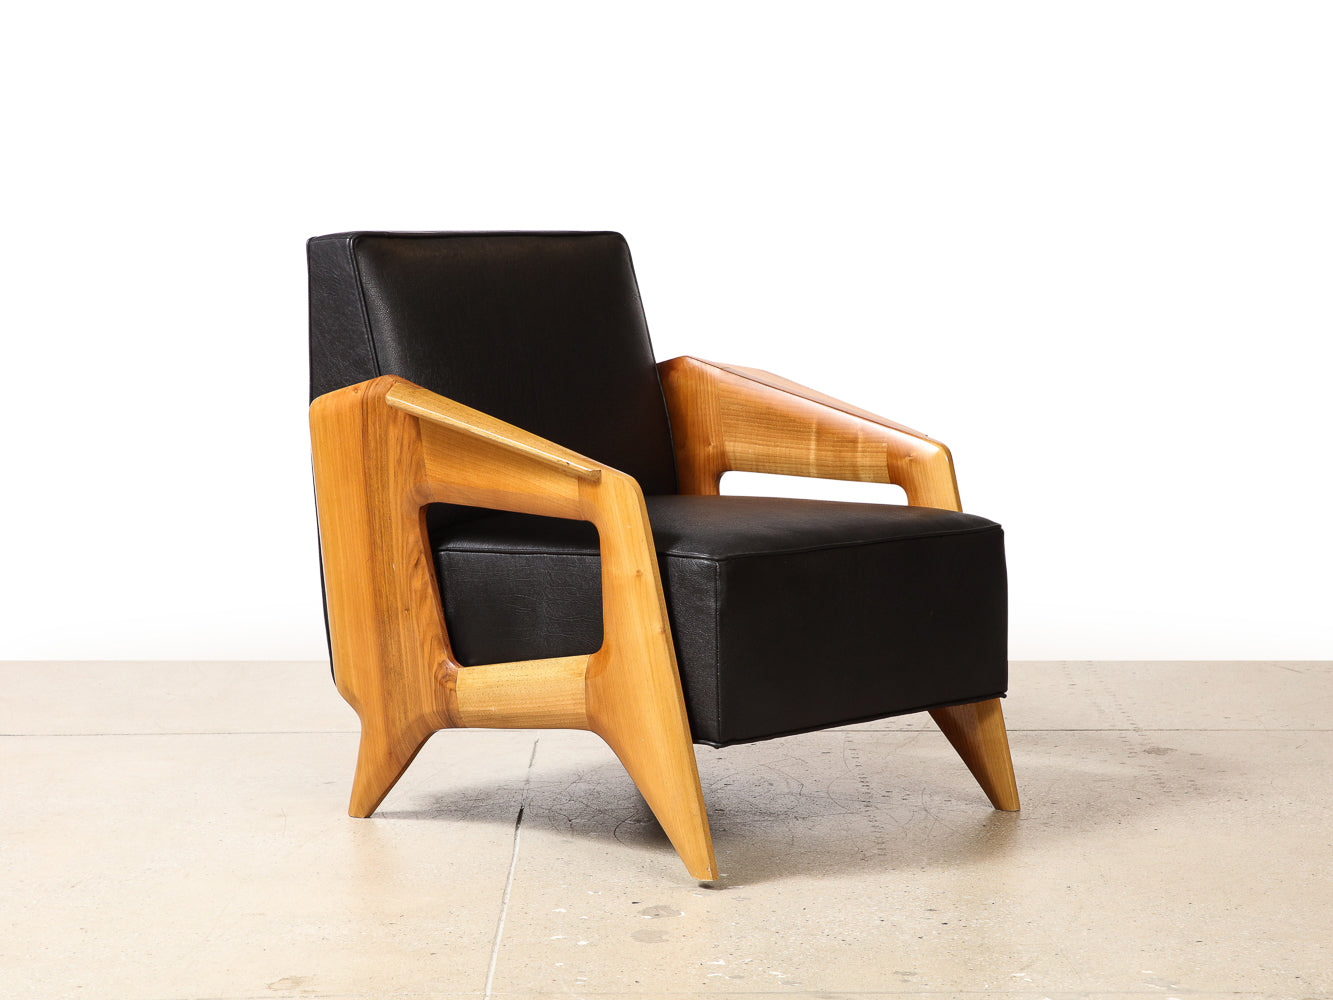 Contemporary Lounge Chair by Donzella Ltd.